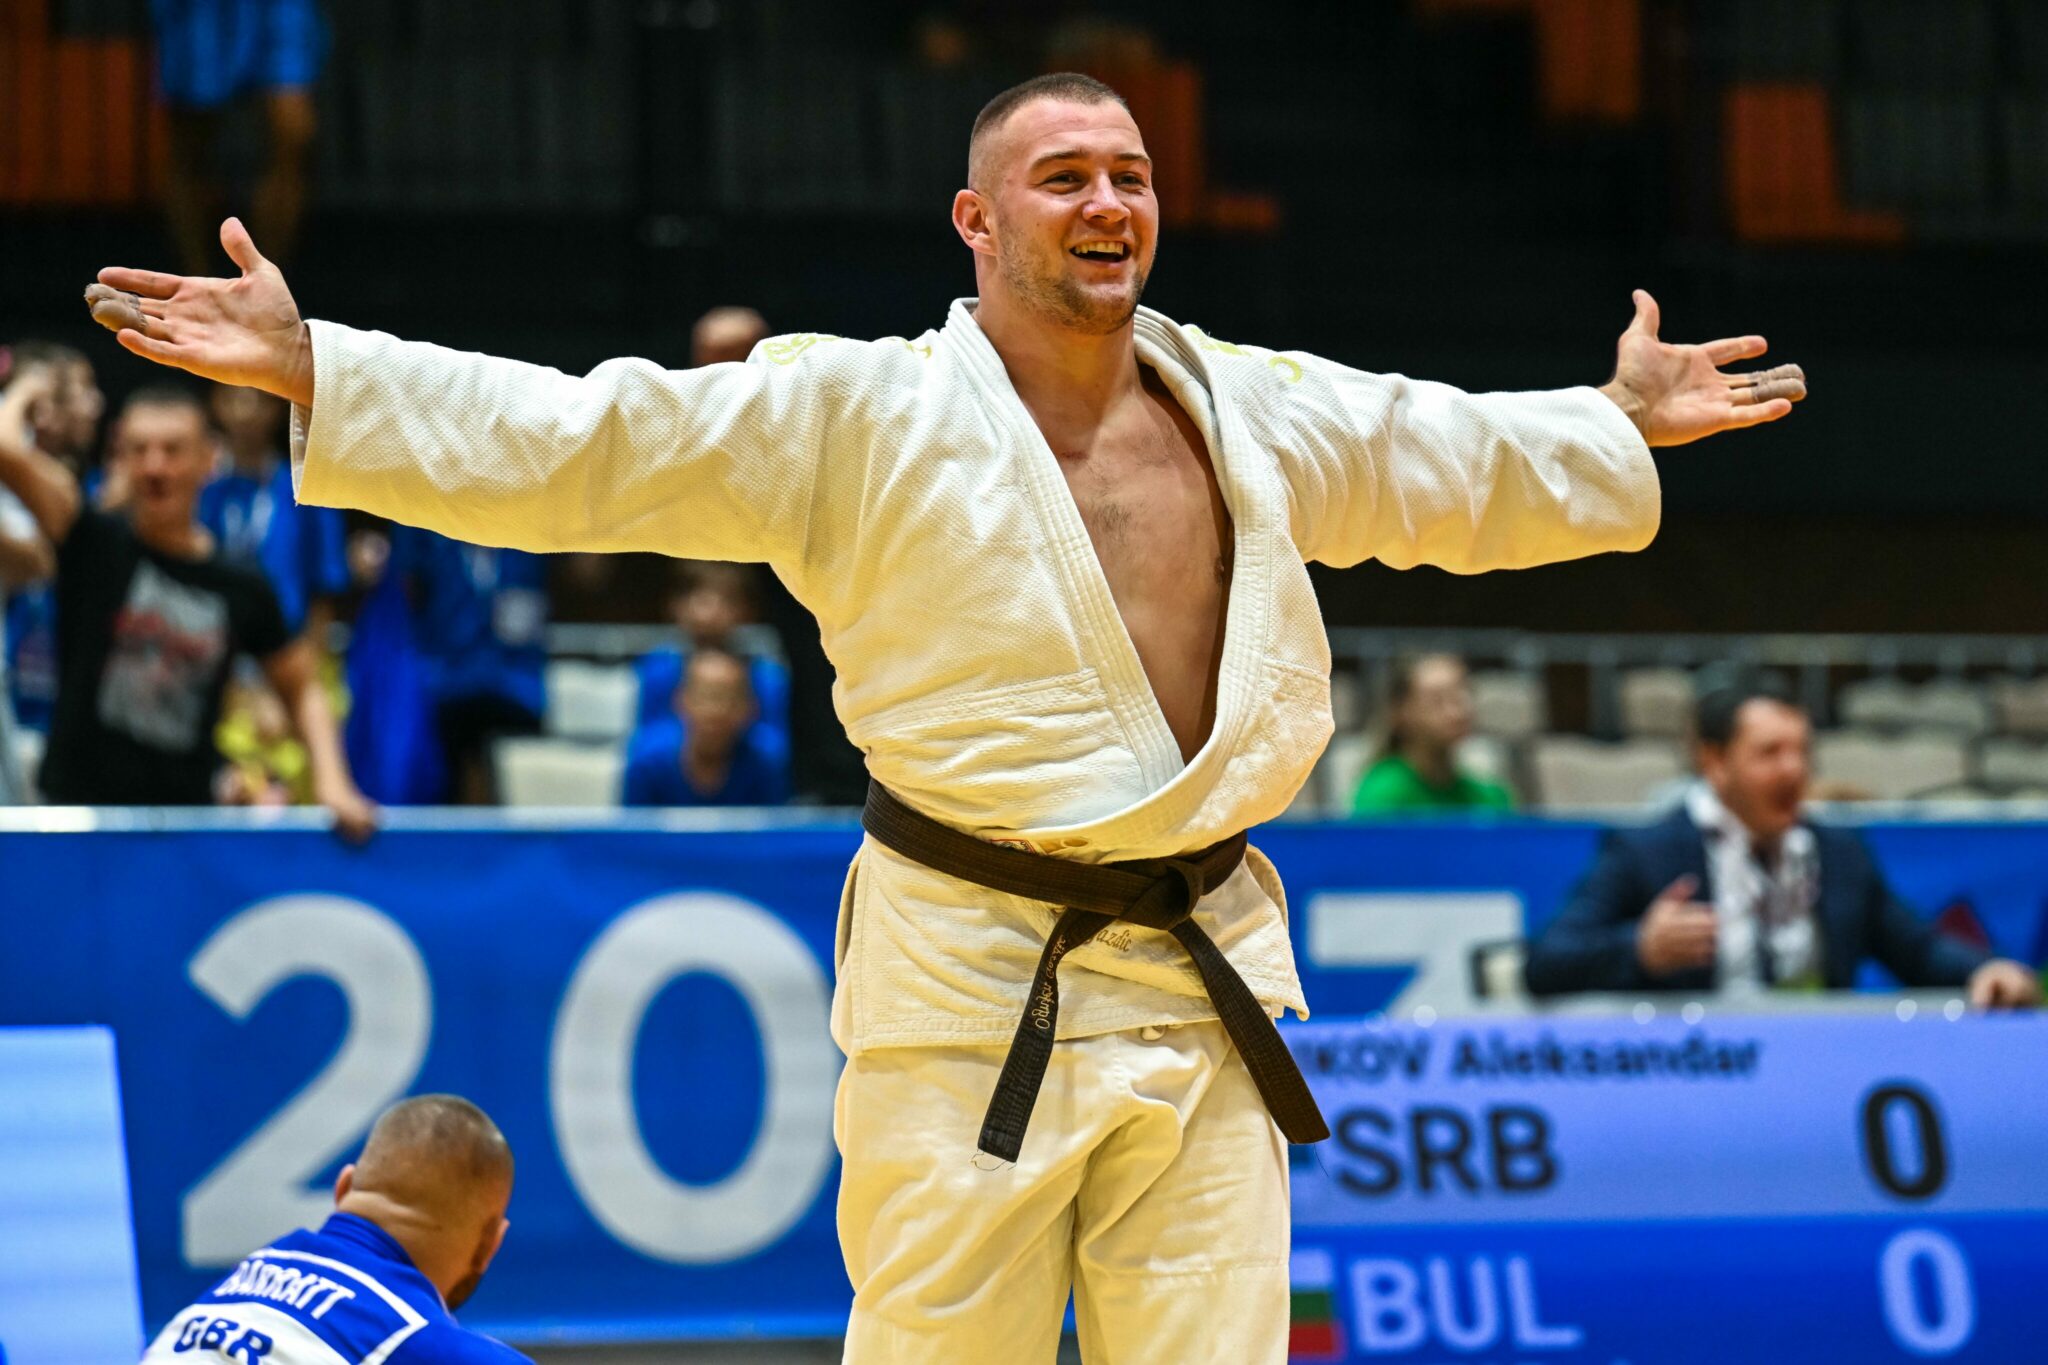 BIH TAKES TWO GOLD MEDALS, PLJEVAČIĆ – NEW FACE ON PODIUM